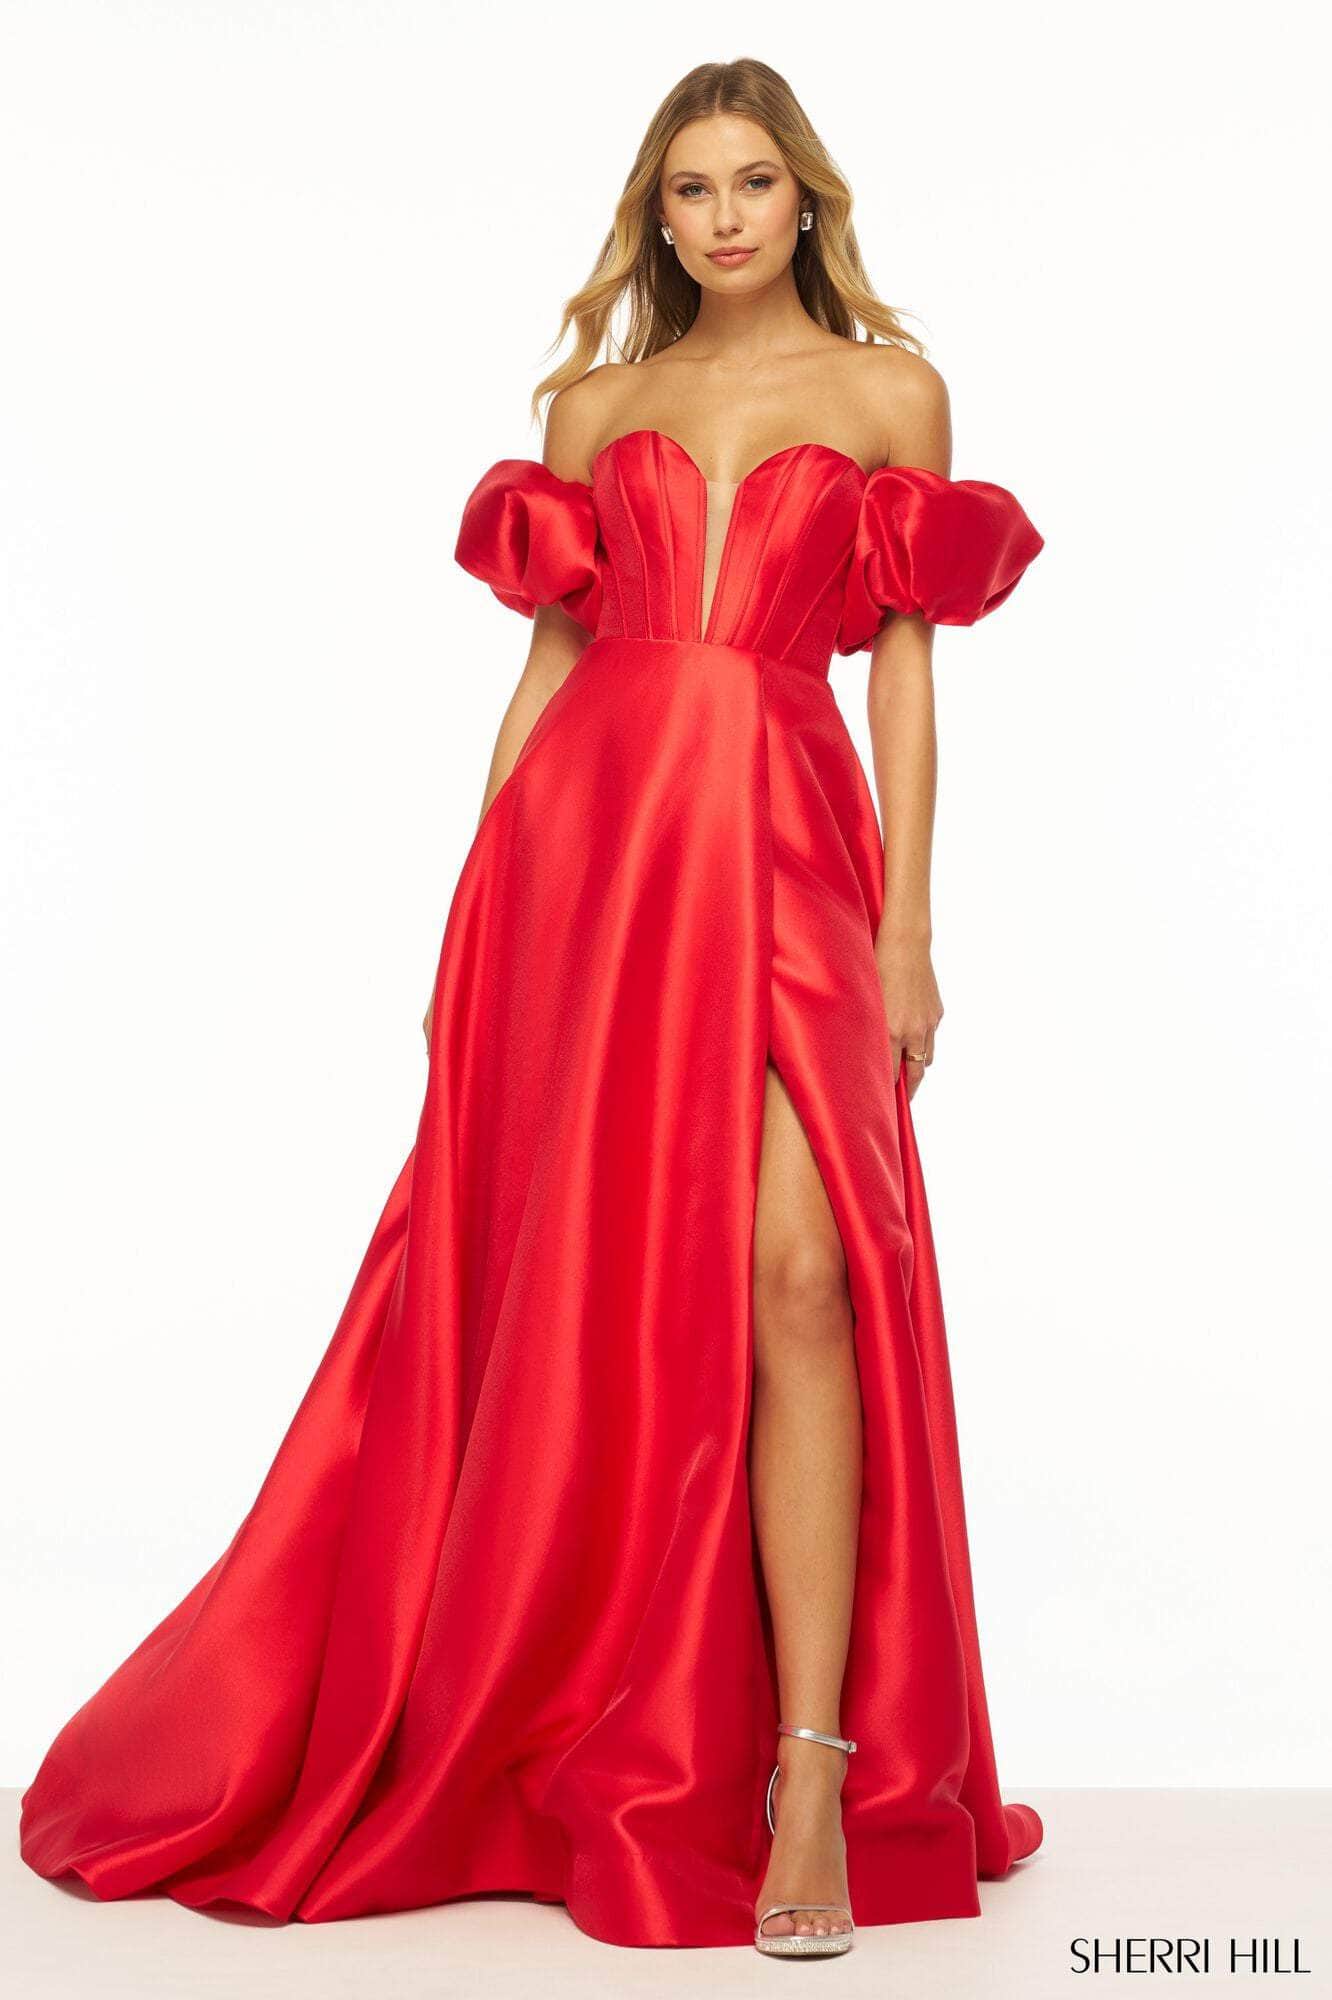 Sherri Hill 56249 - Slit Boning Prom Gown Special Occasion Dress